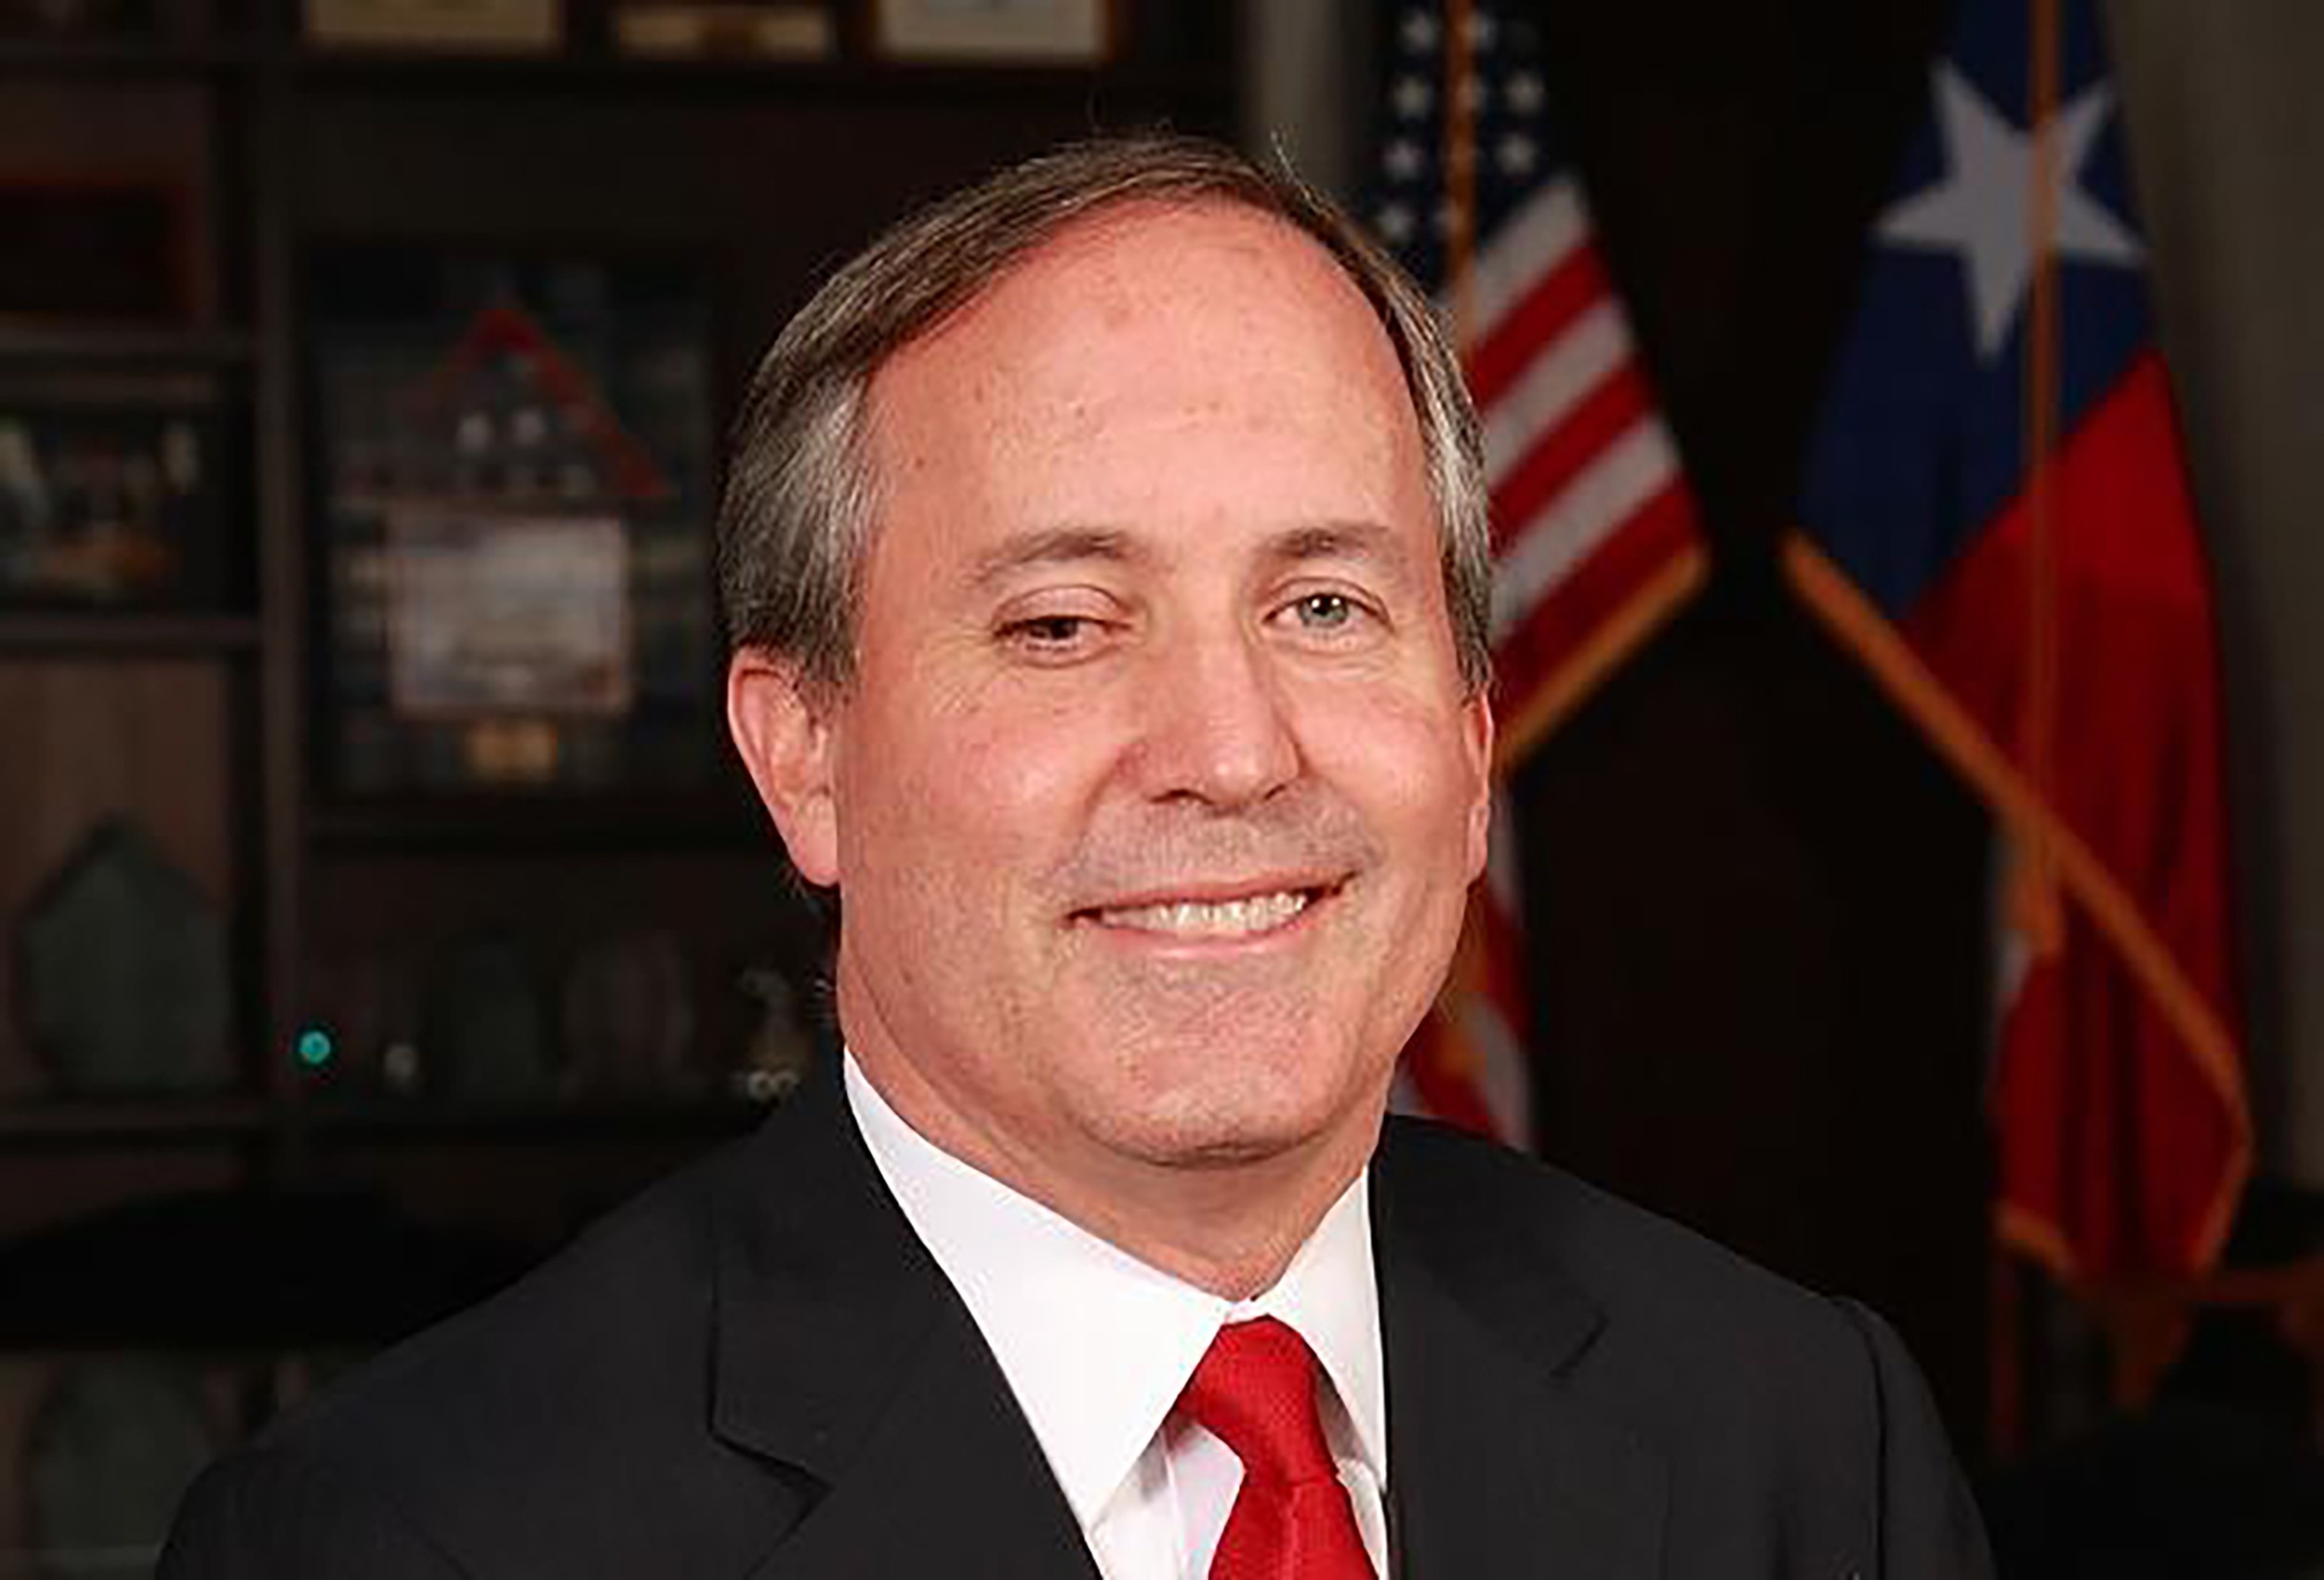 Paxton Threatens to Sue the U.S. Department of Homeland Security